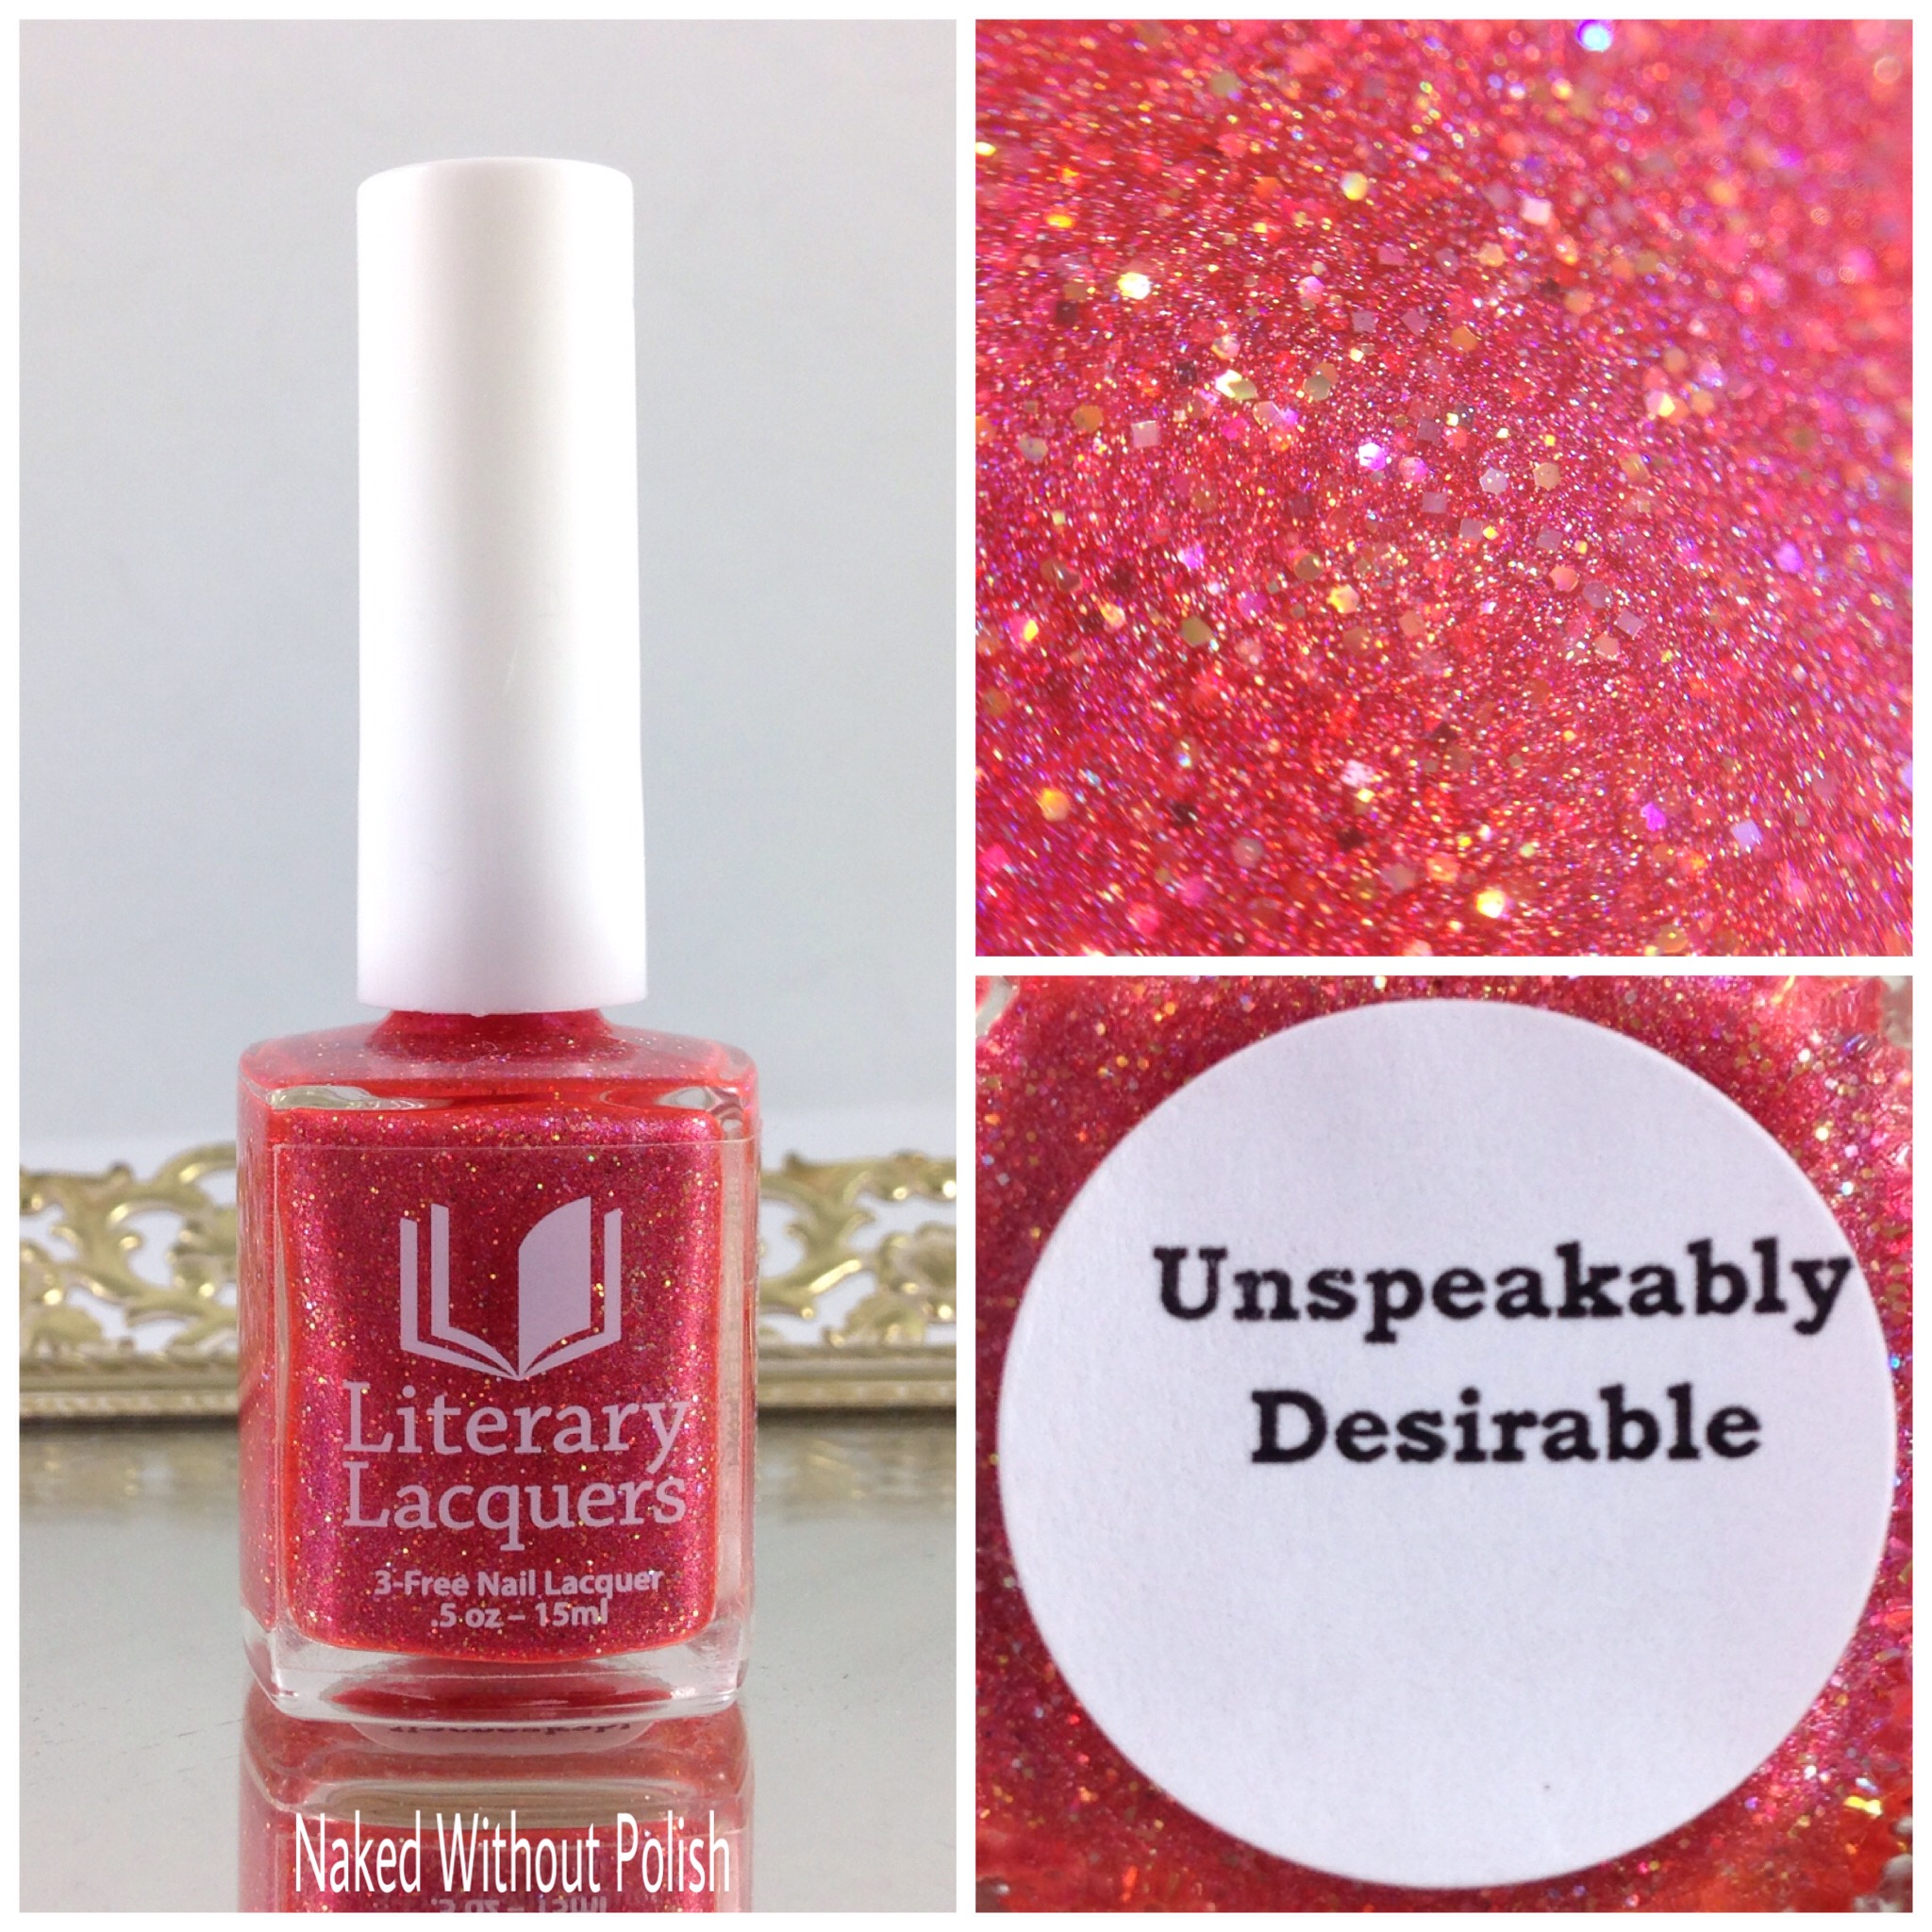 Literary-Lacquers-Unspeakably-Desirable-1